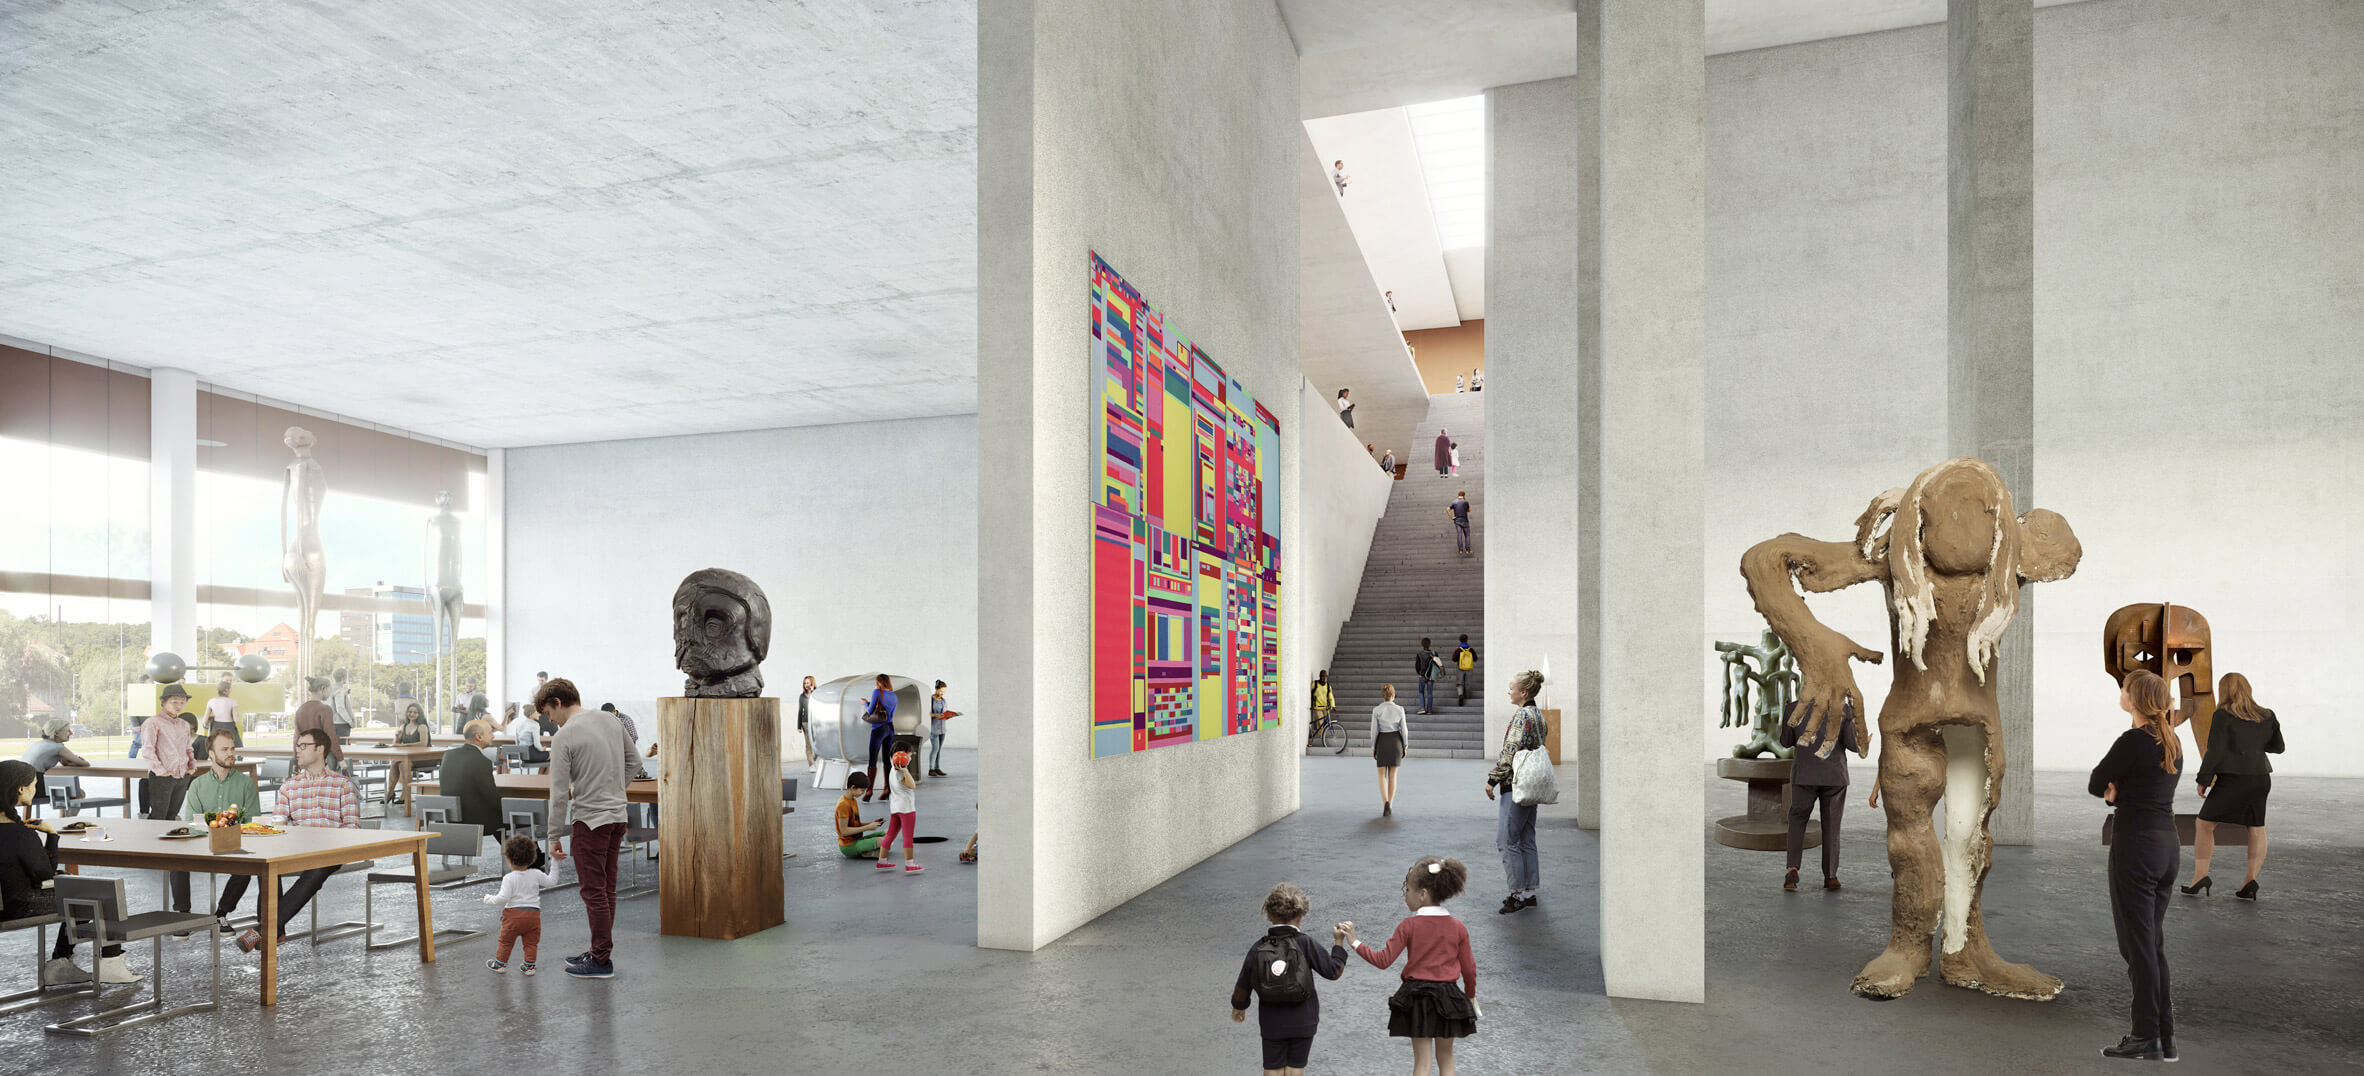 interior rendering of a concrete gallery with large scale installations